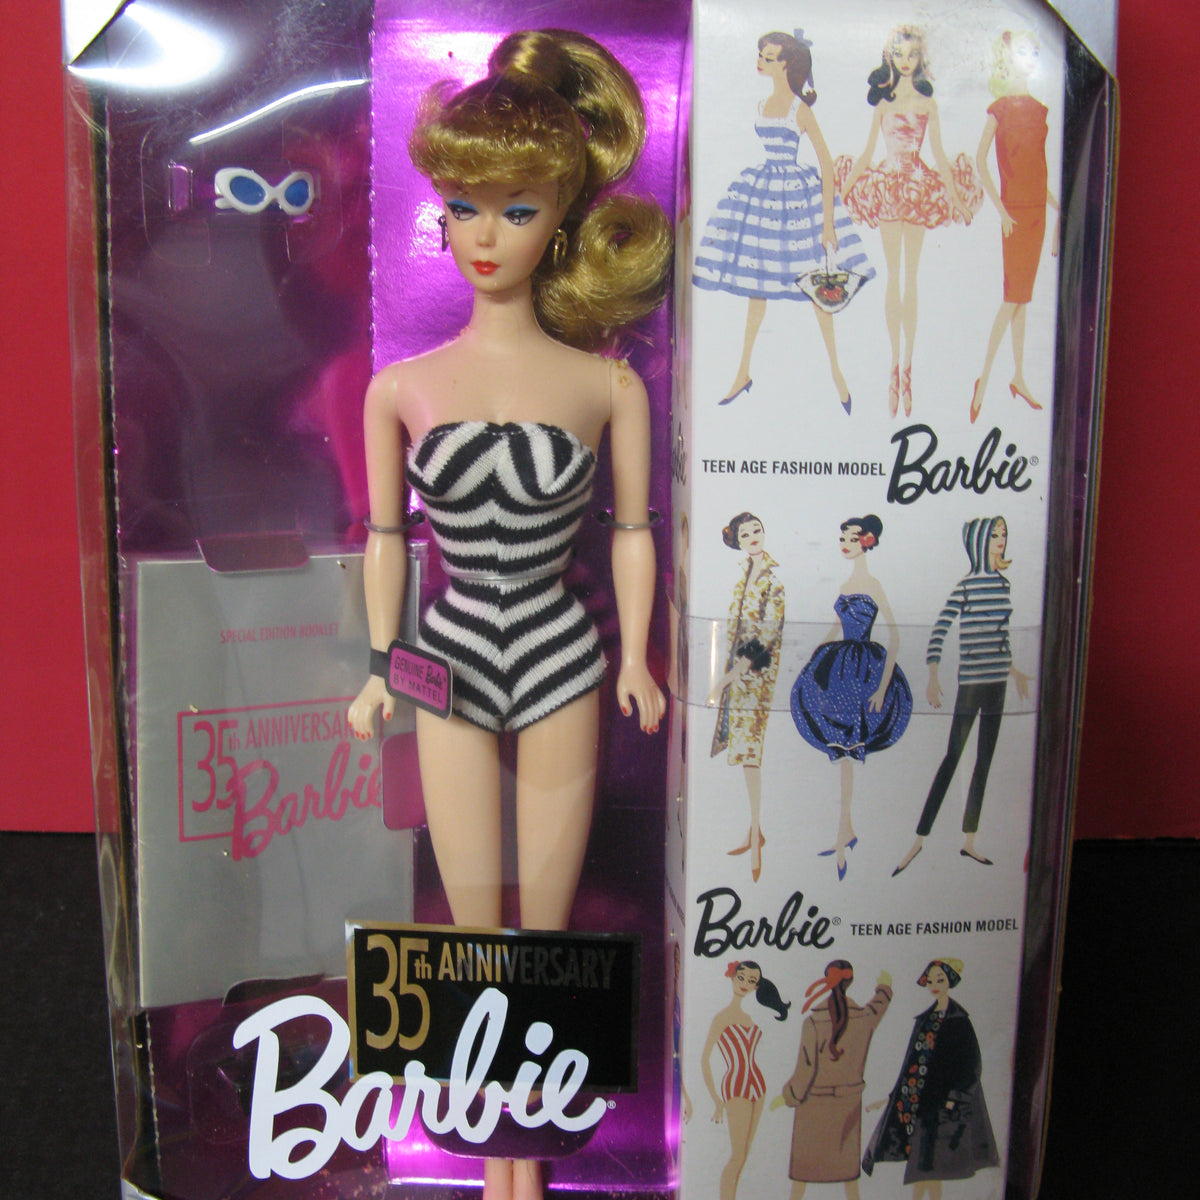 1959 Barbie Doll and Package — The Antique Museum